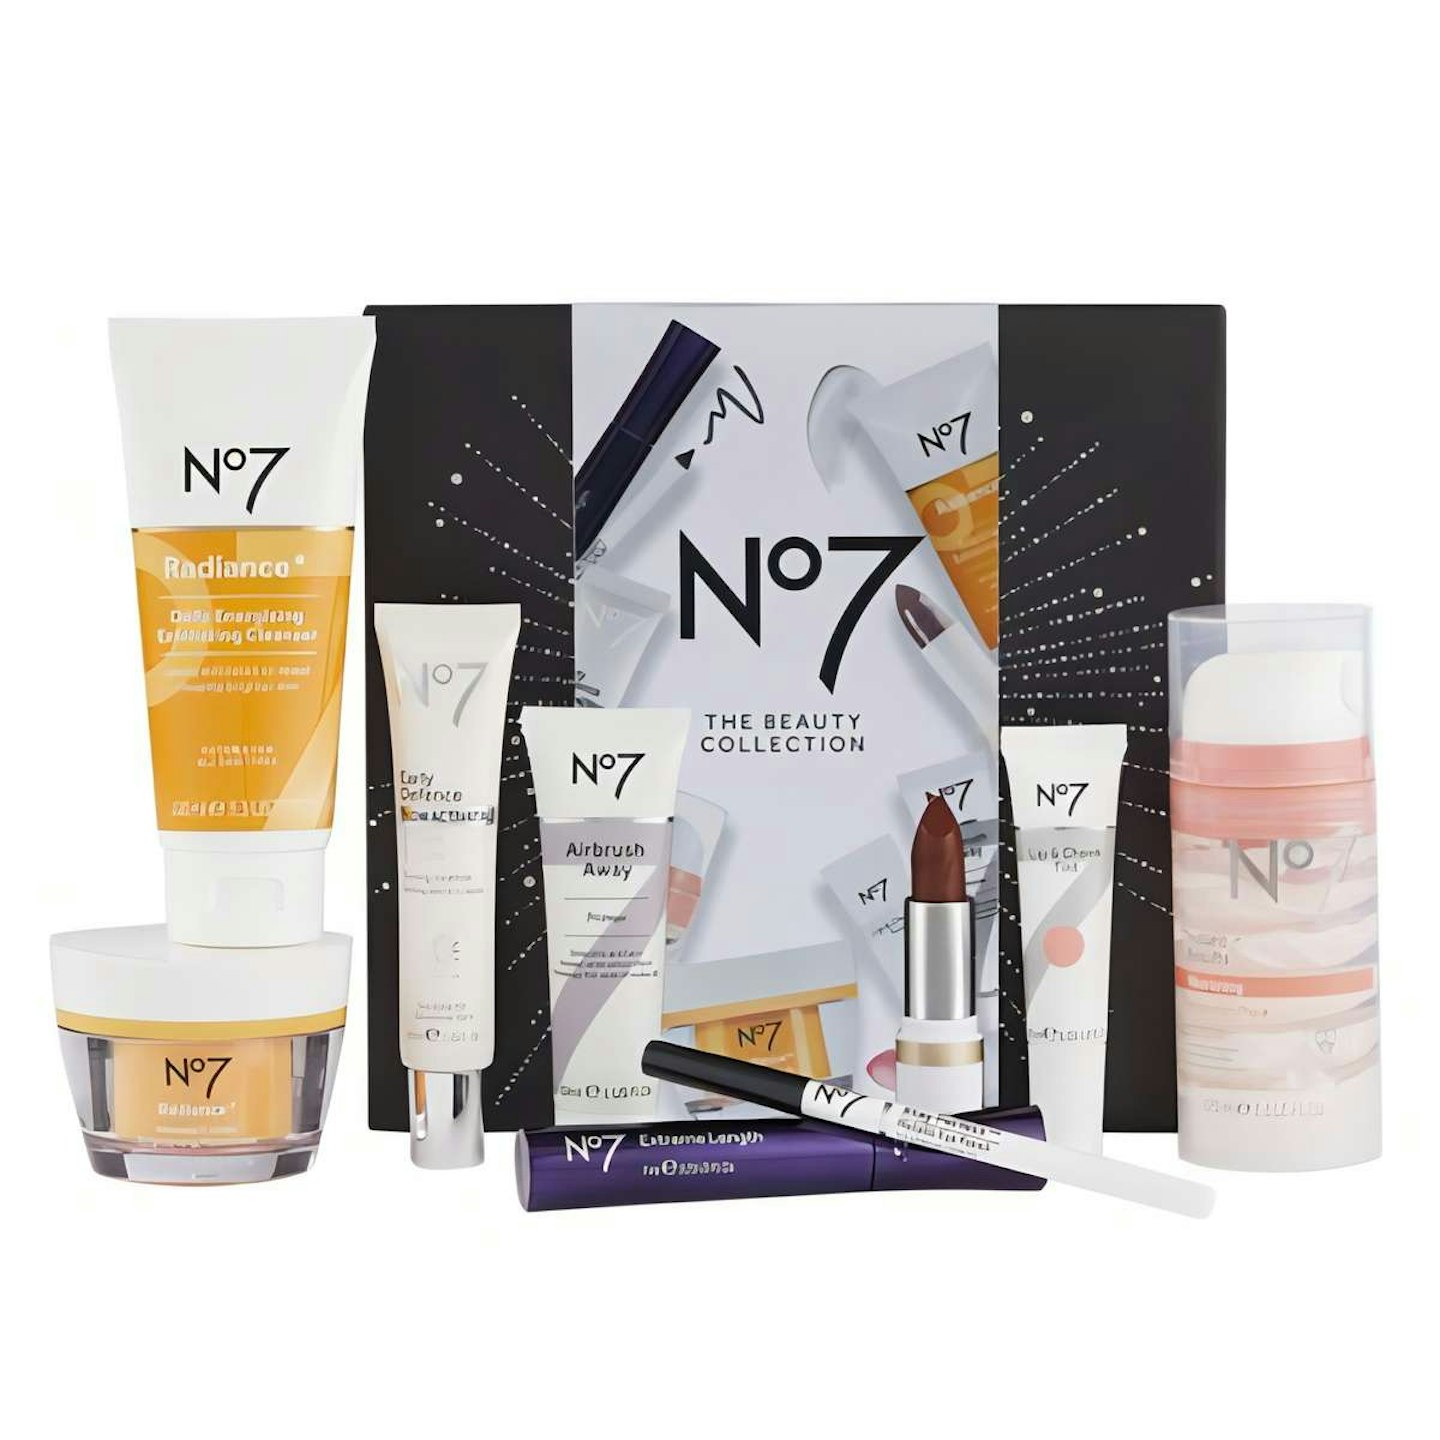 No7 The Beauty Collection, £35